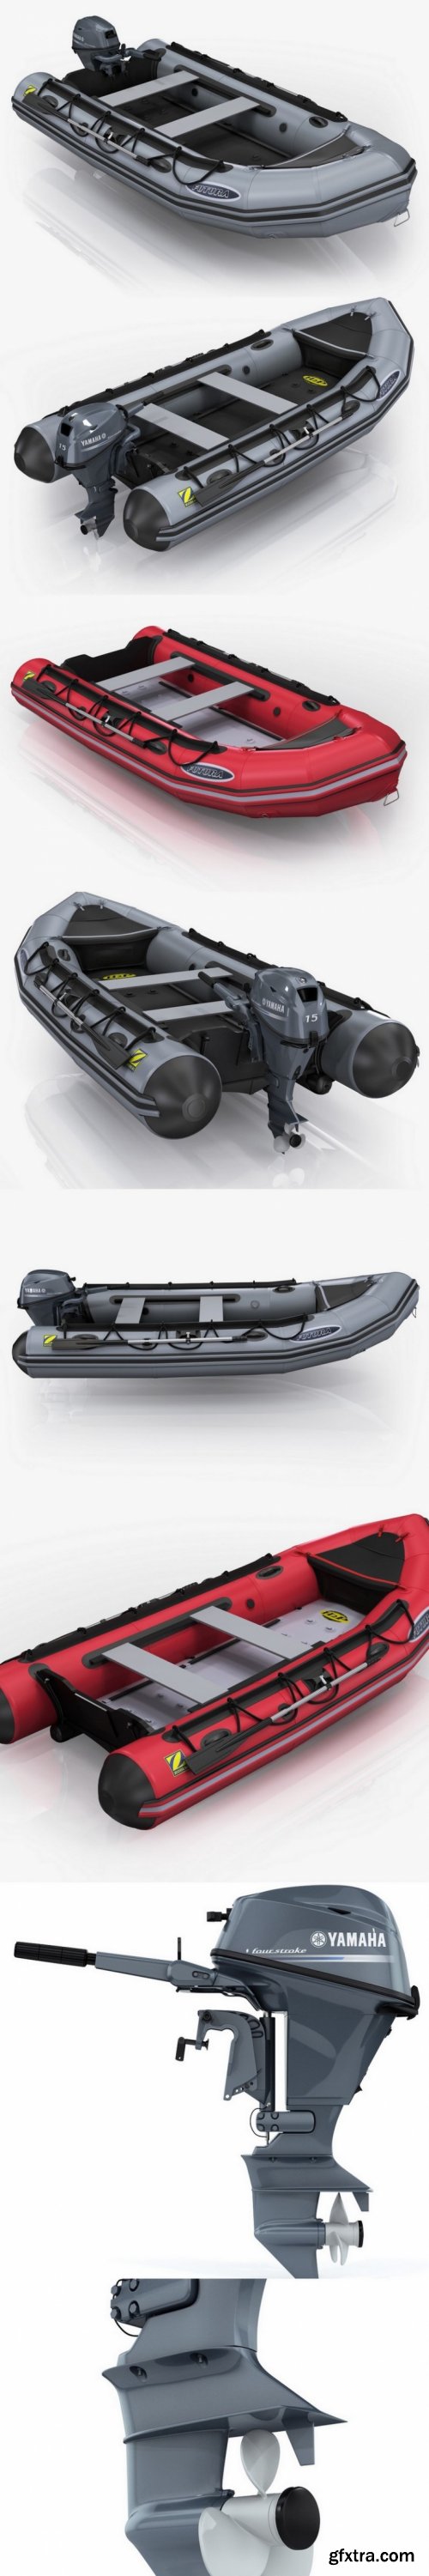 Turbosquid - Inflatable boat Zodiac Mark-2 and Yamaha F15 portable outboard 3D model